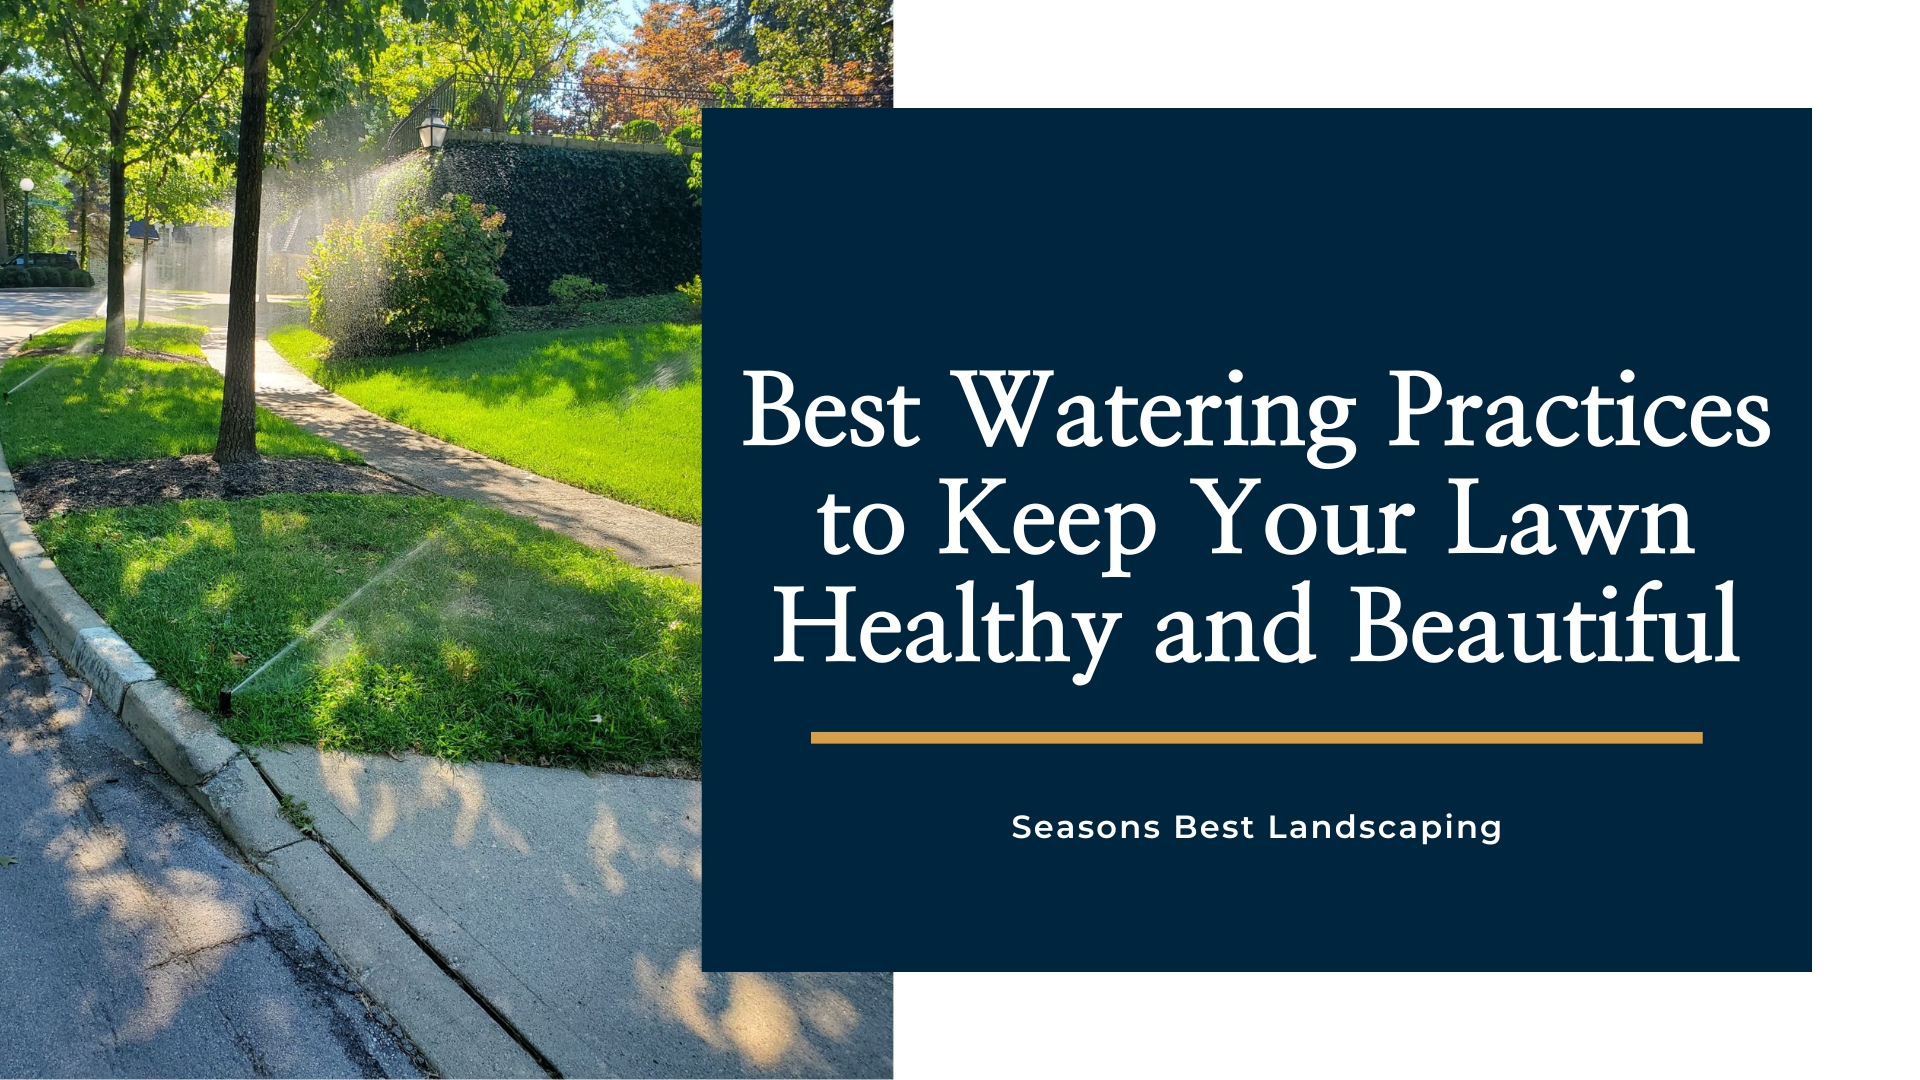 Best Watering Times for Your Grass - Seasons Best Landscaping